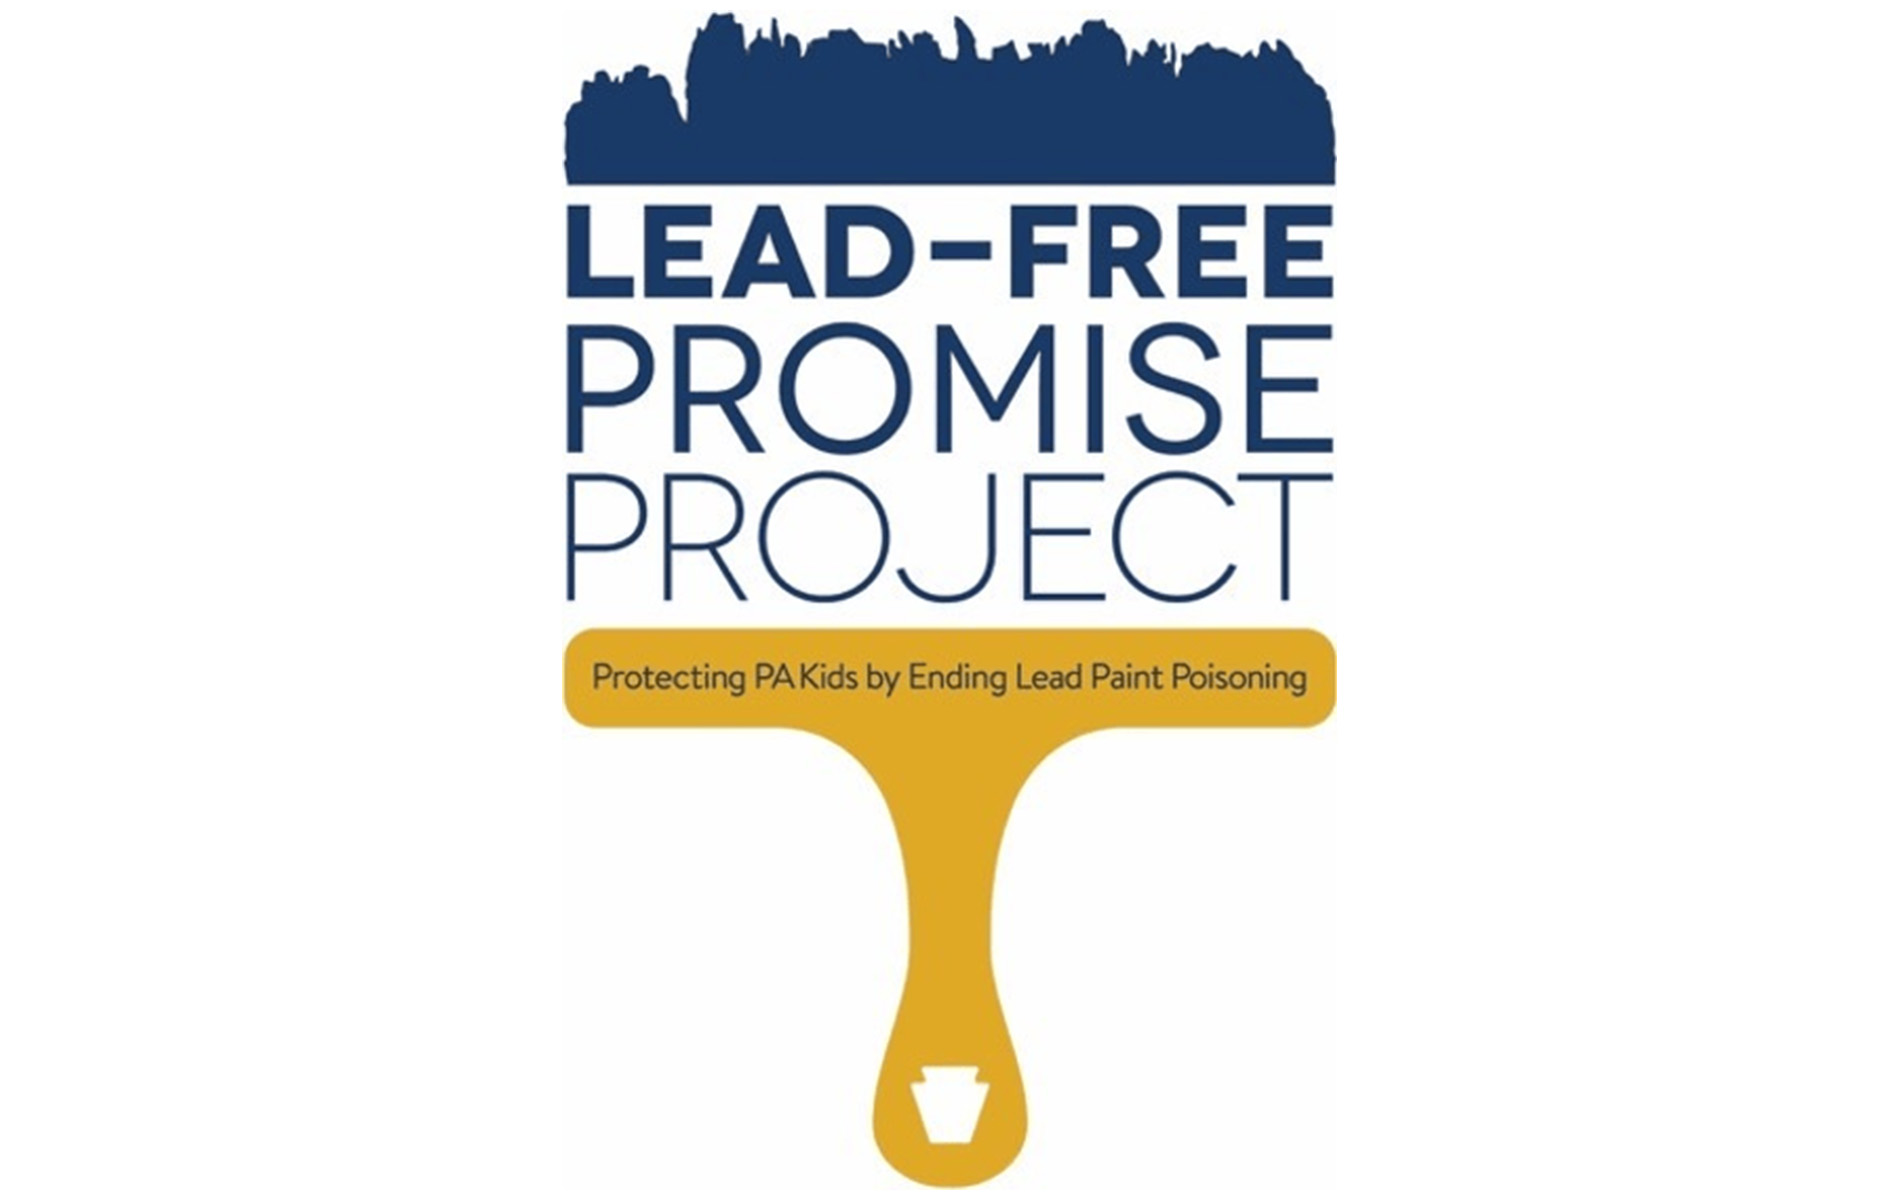 Lead-Free Promise Project logo